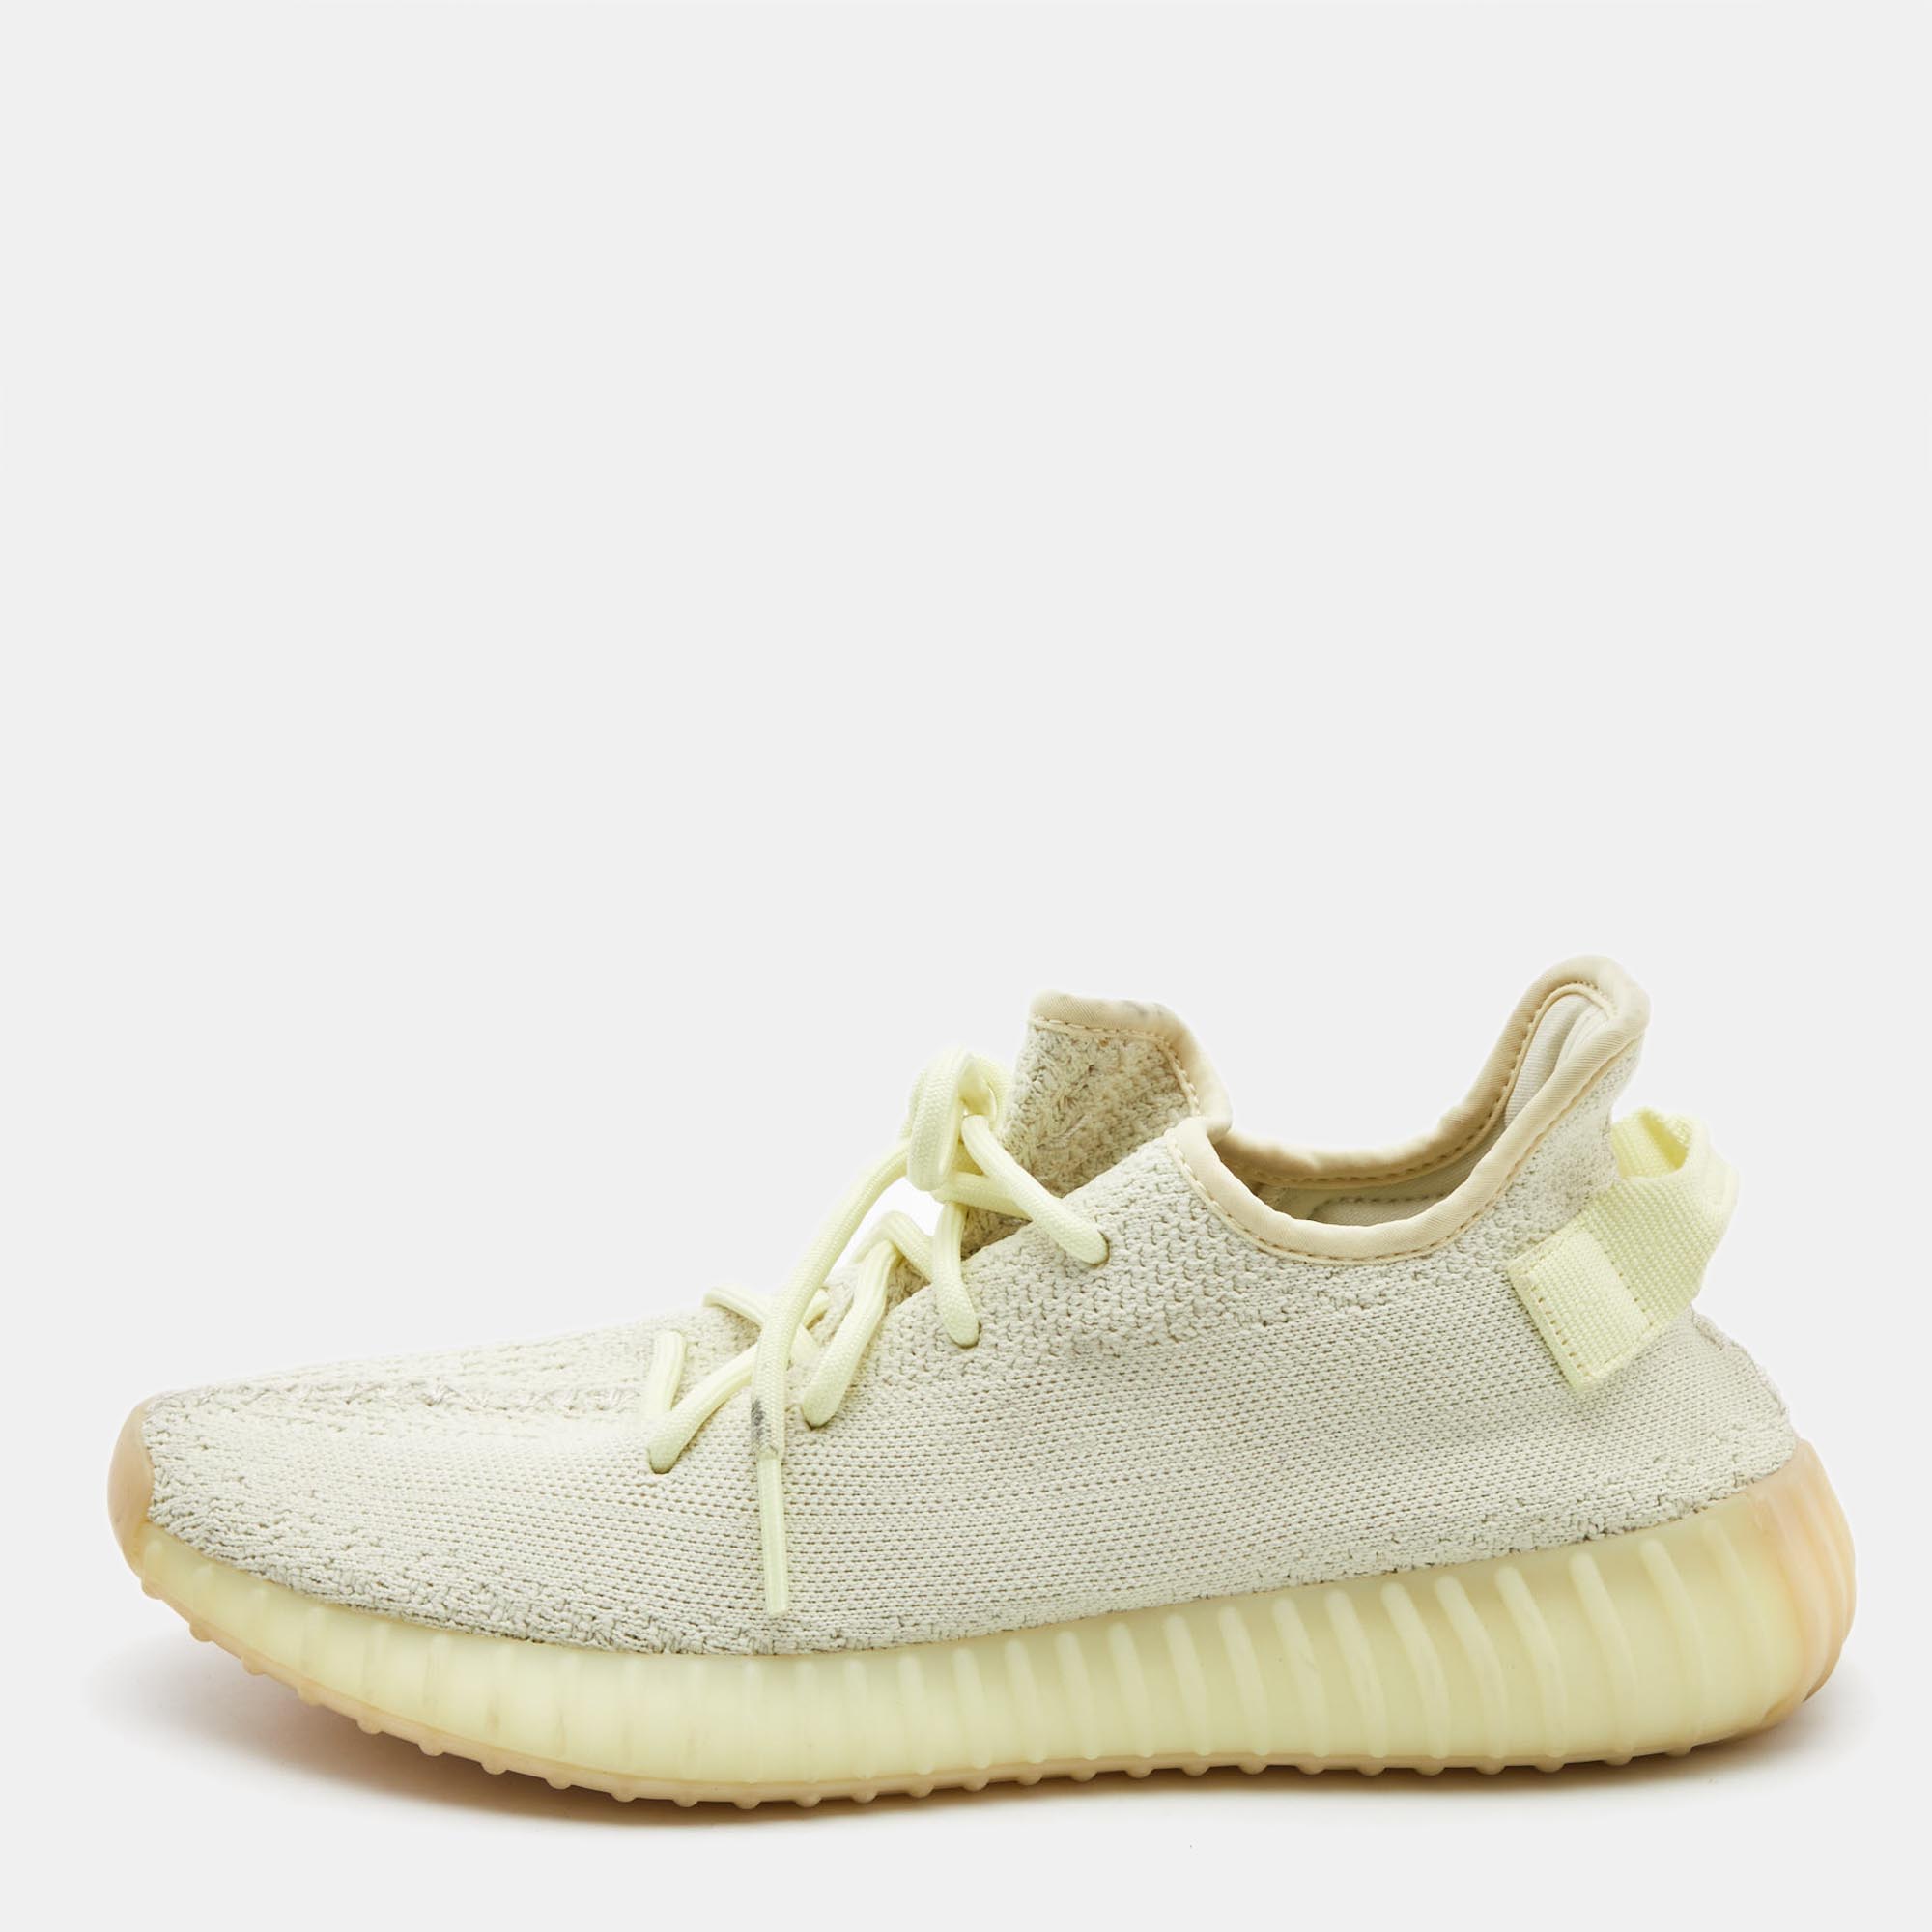 

Yeezy x Adidas Light Yellow Knit Fabric Boost 350 V2 Butter Sneakers Size  1/3